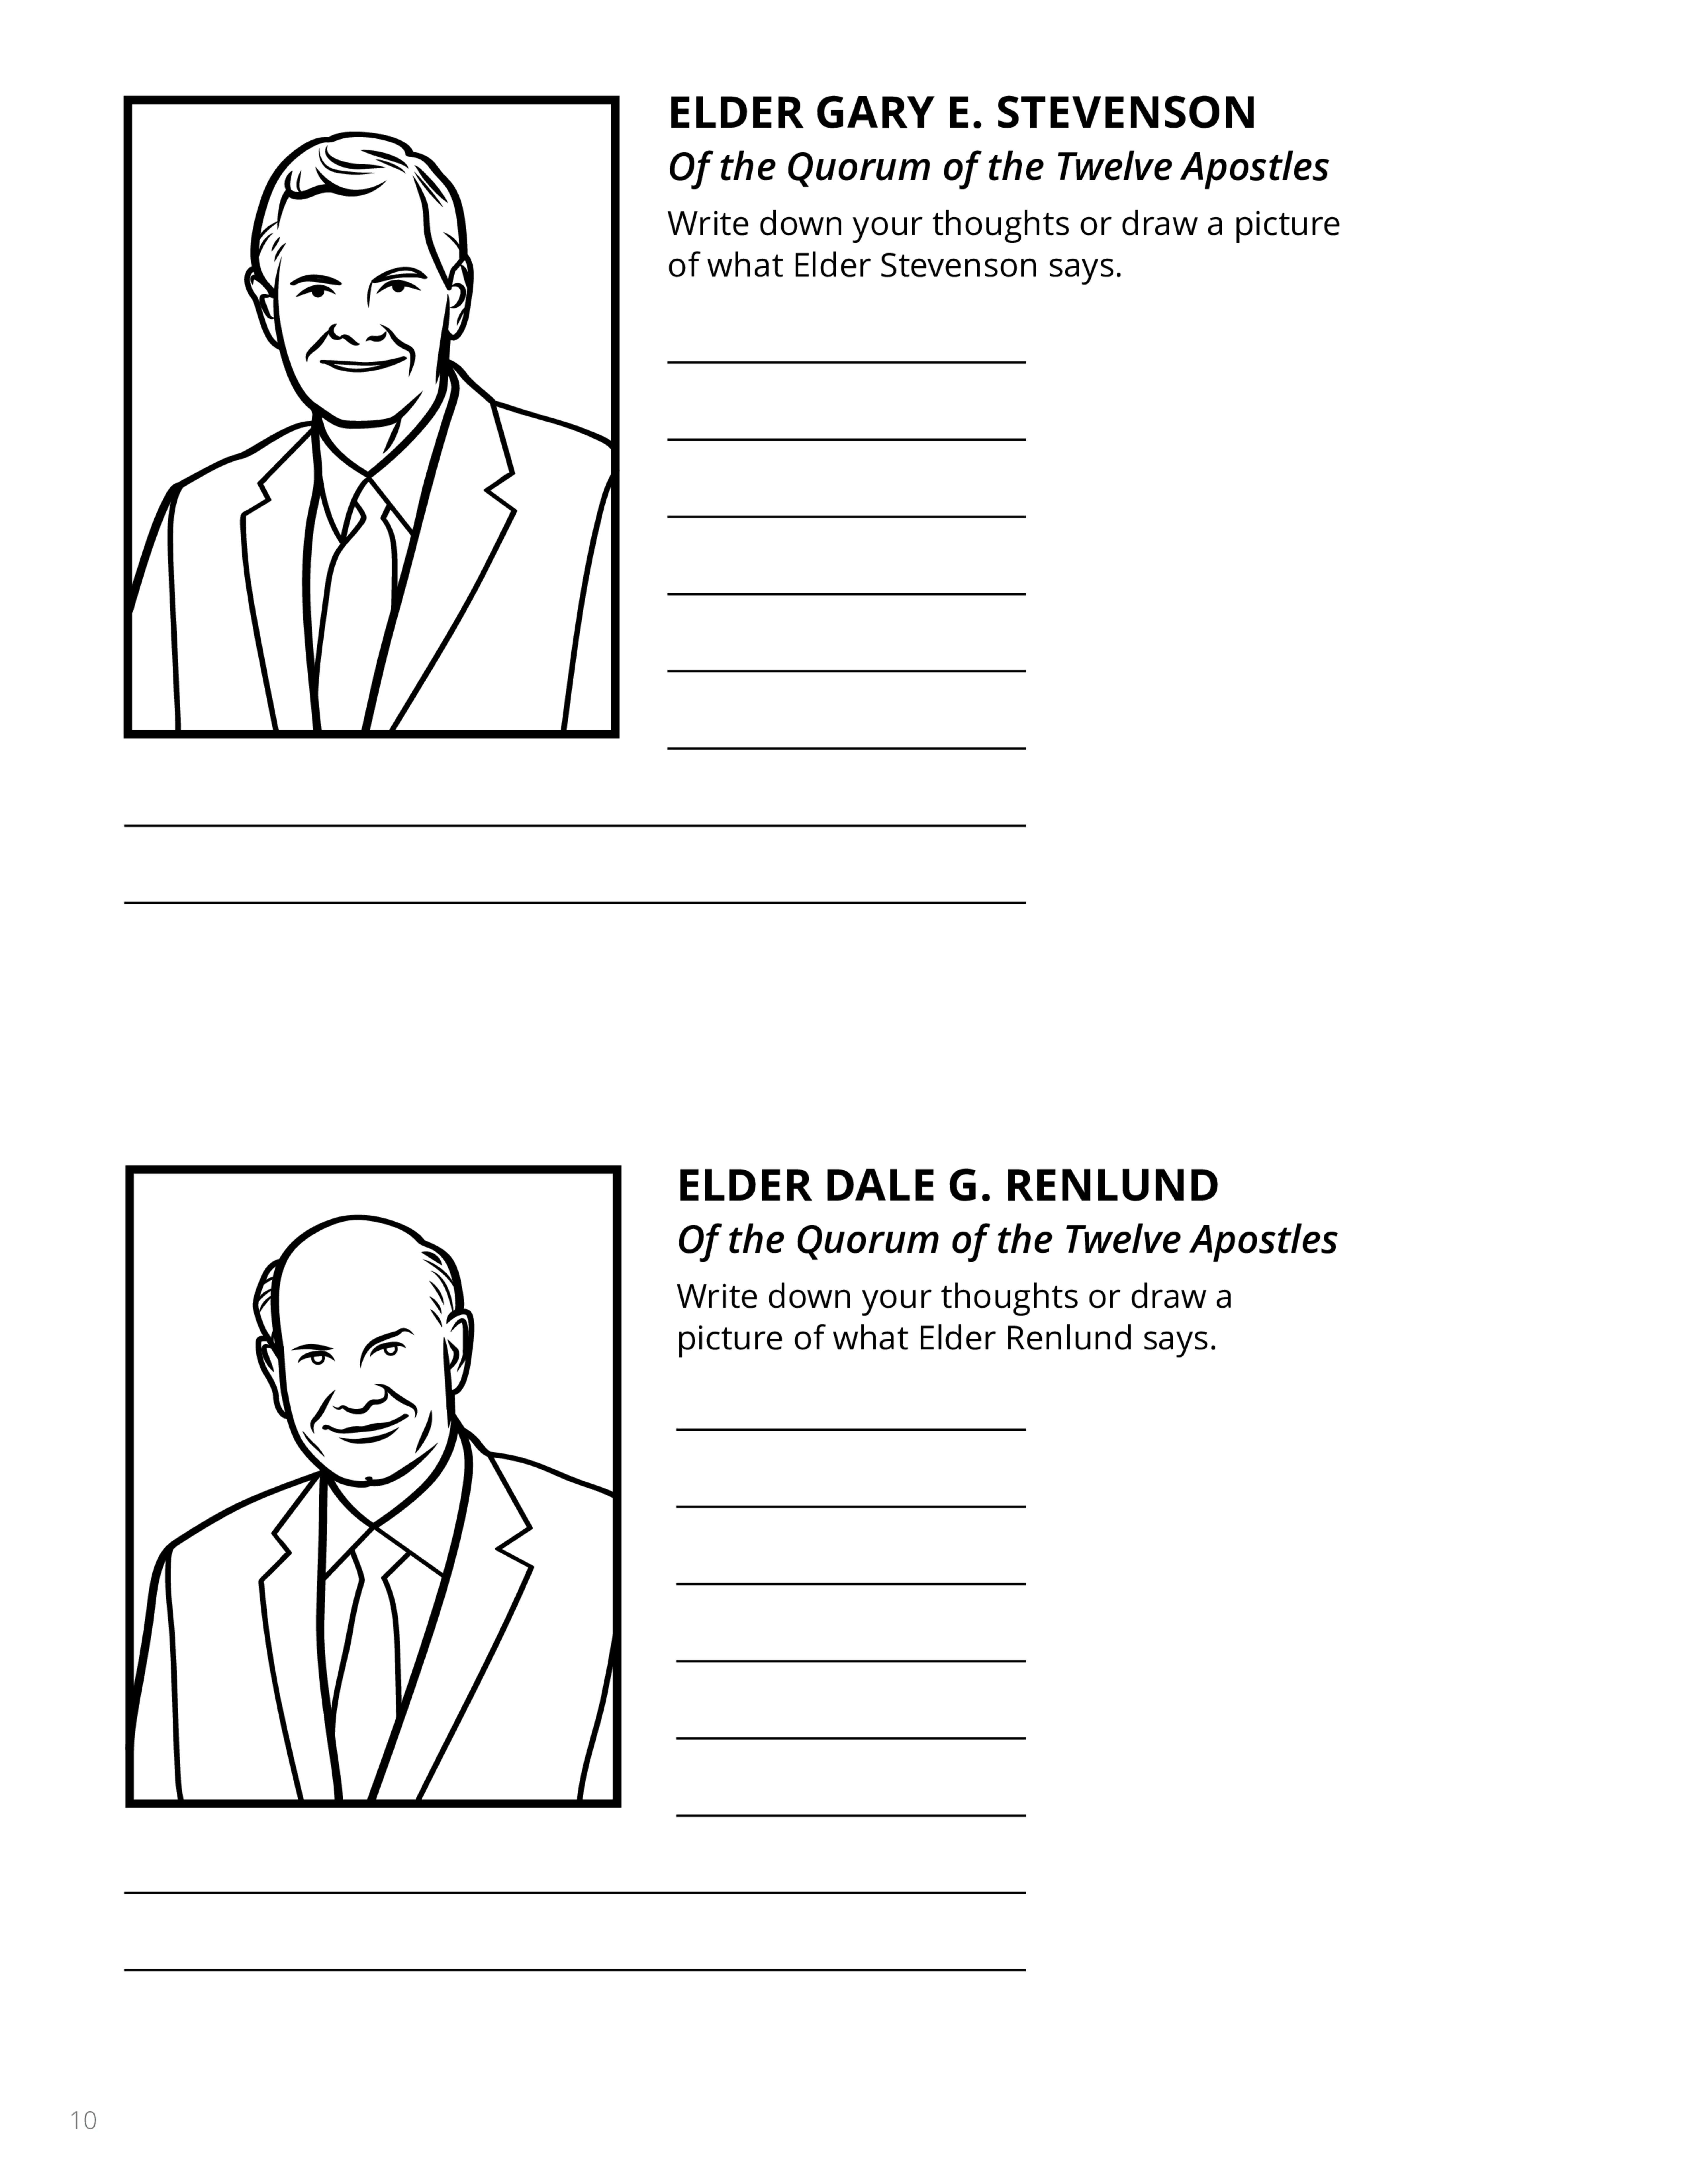 An activity page to encourage children to listen and write down thoughts or draw a picture of what Gary E. Stevenson and Dale G. Renlund say.